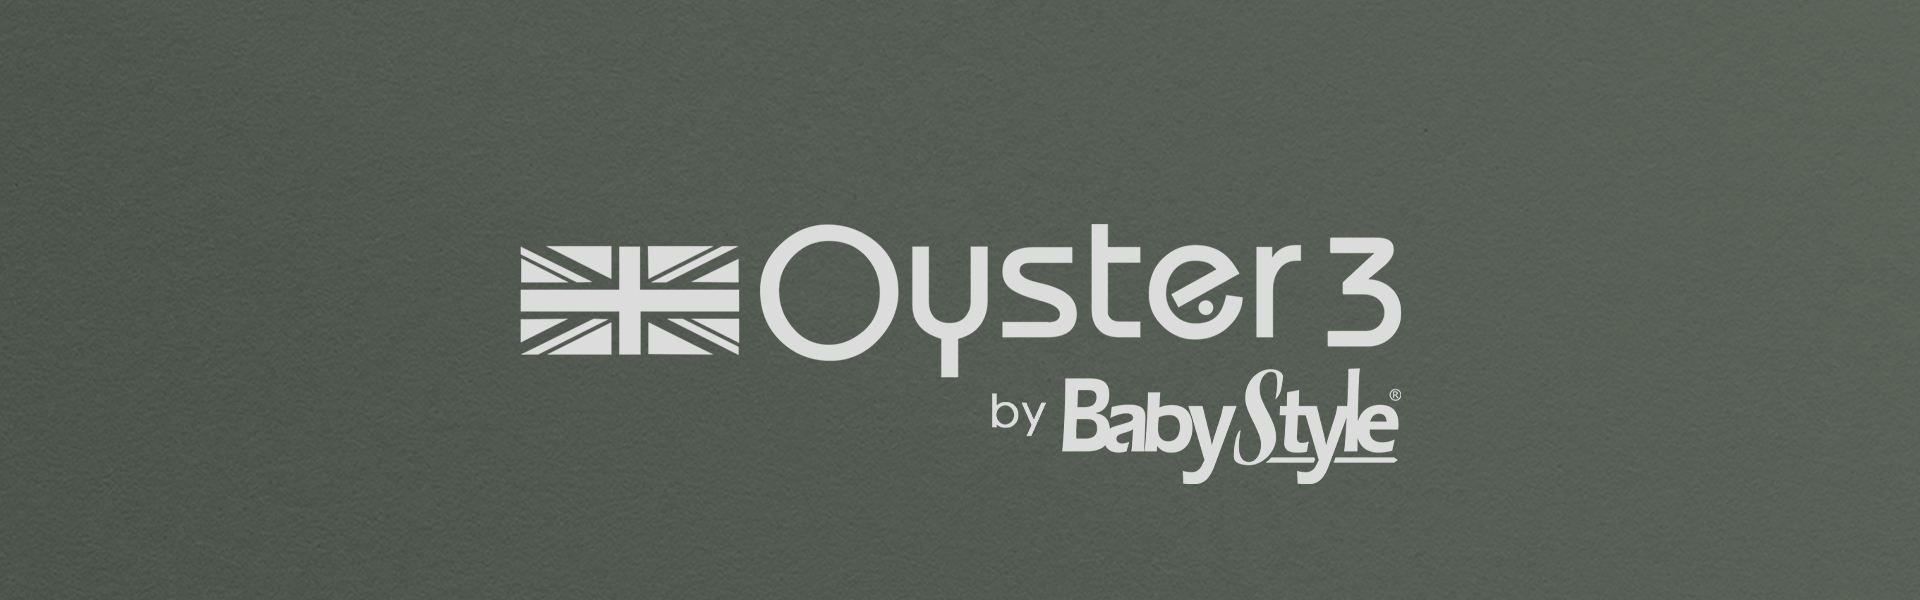 Oyster3 Banner